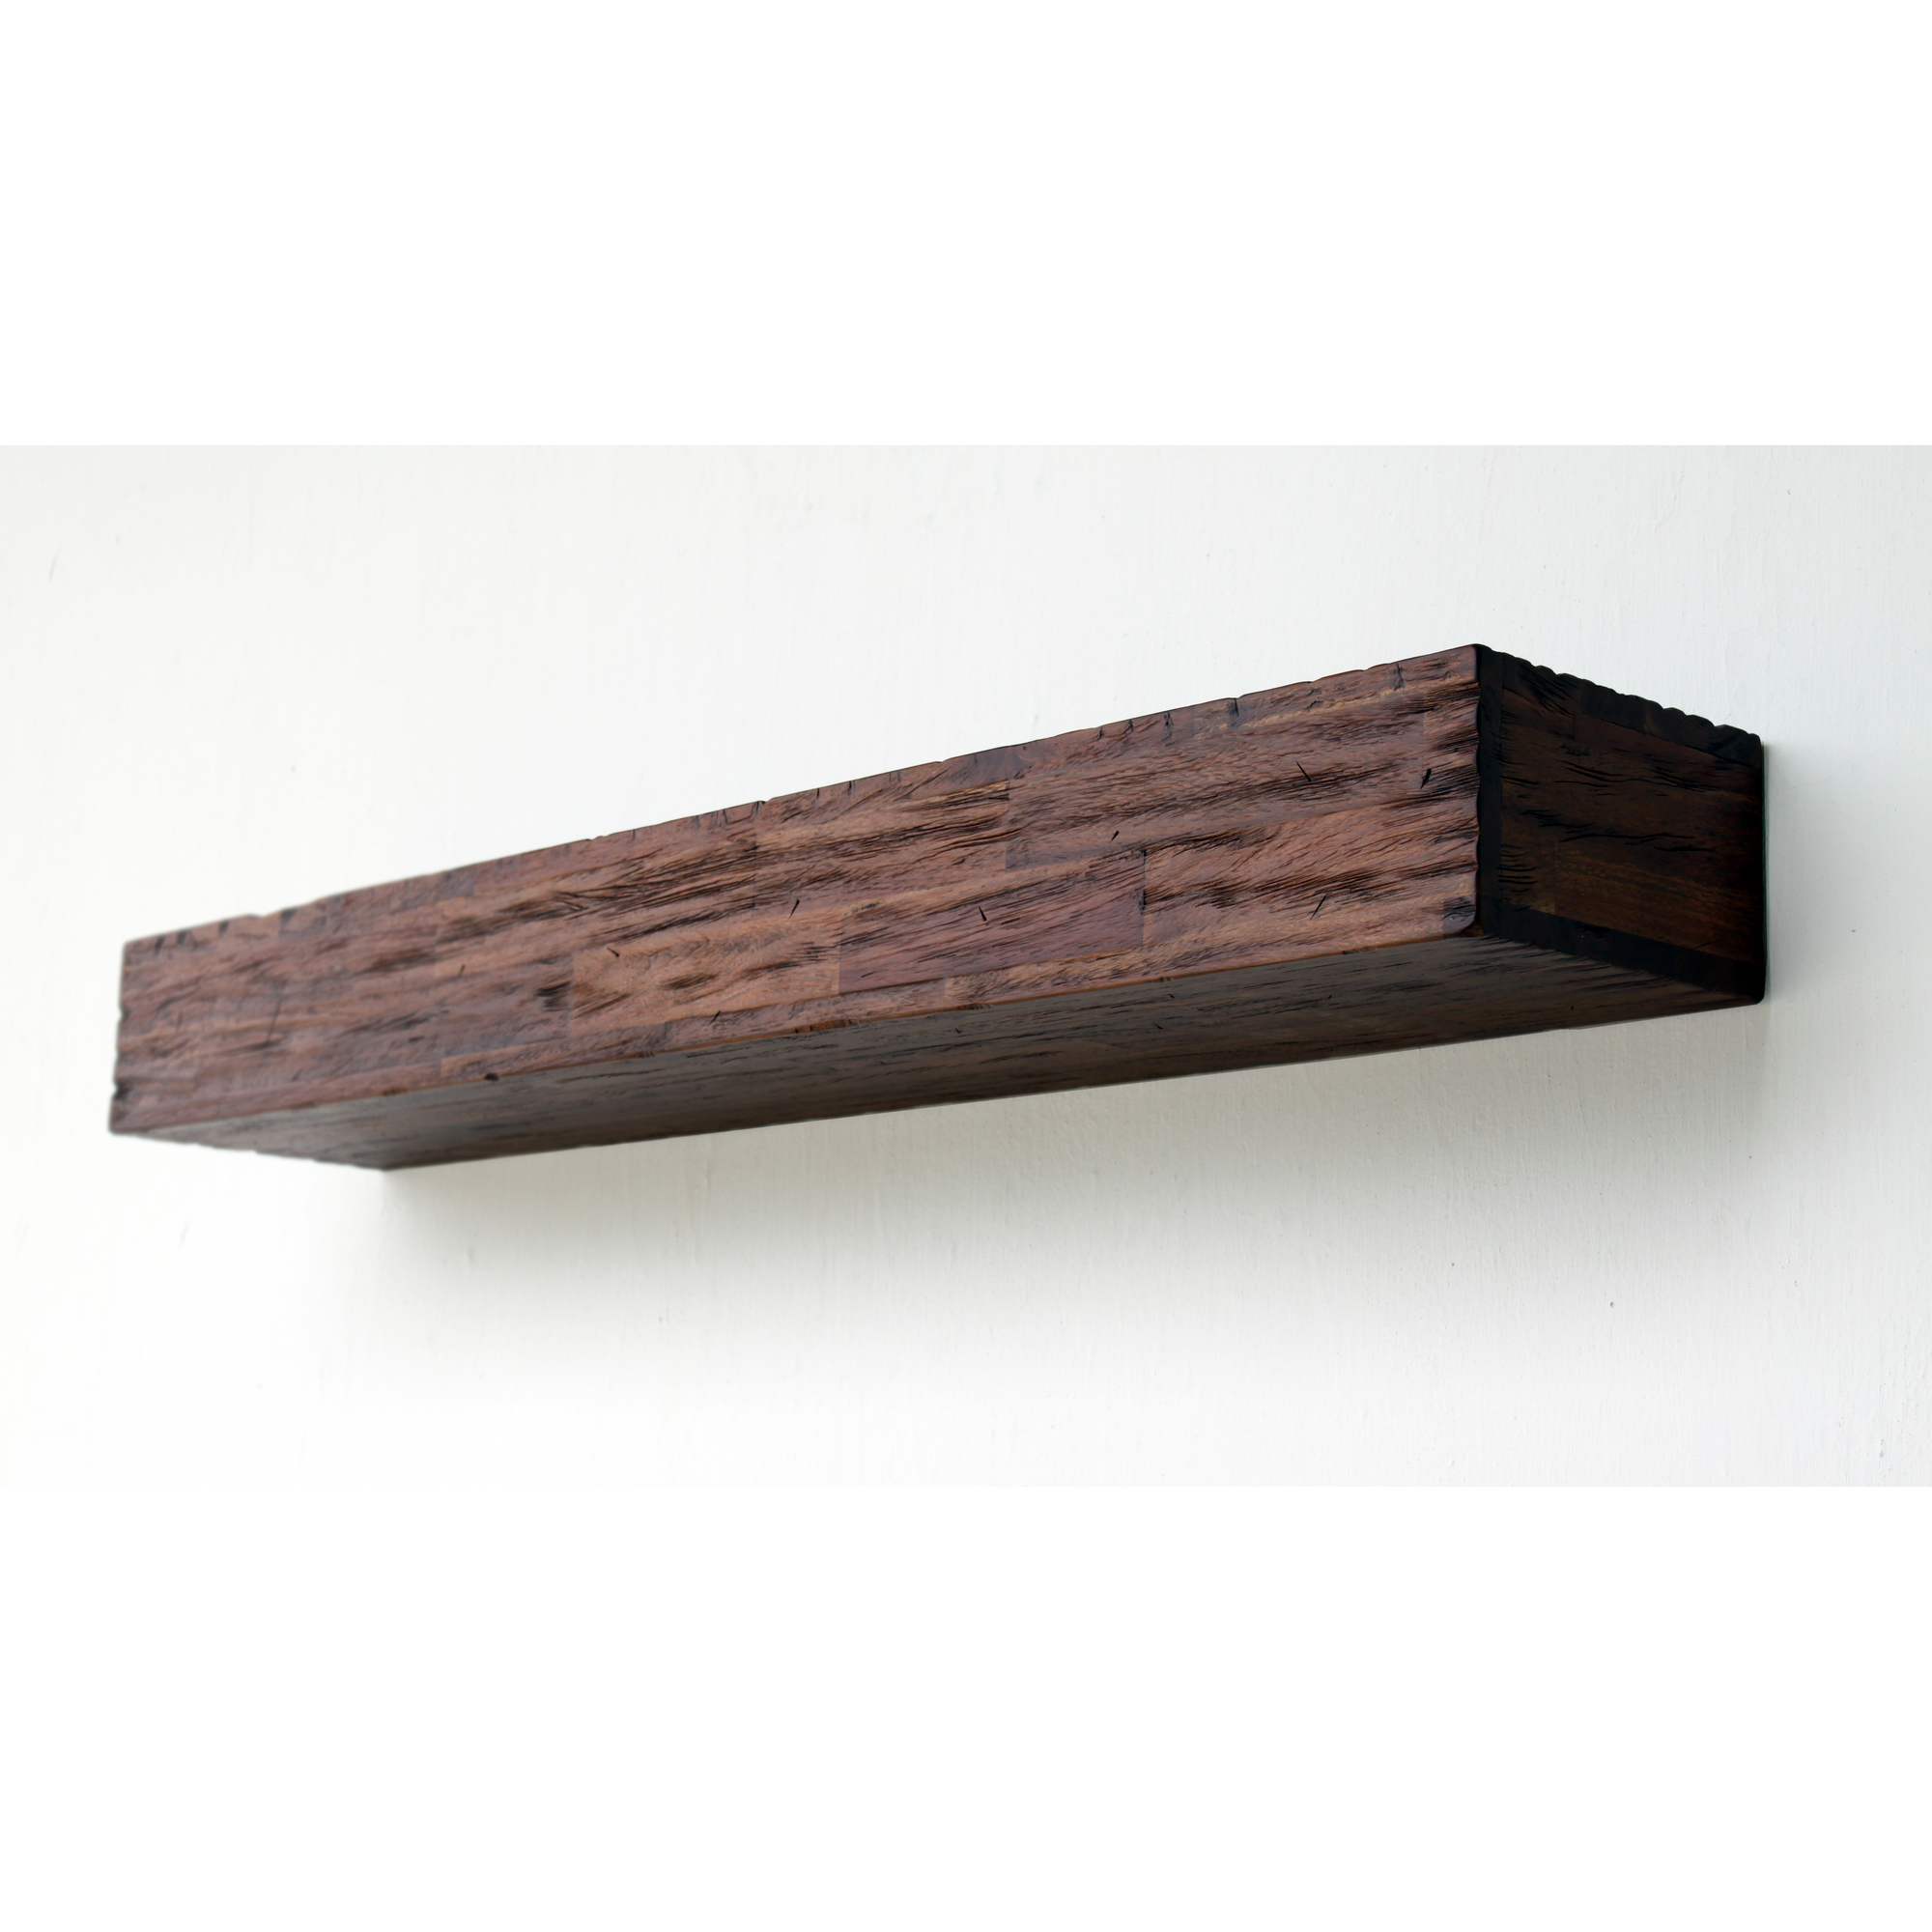 Merry Products, Fireplace Mantel Wall Shelf Beam 60Inch, Width 60 in, Depth 8.5 in, Material Wood, Model SLF0220115010